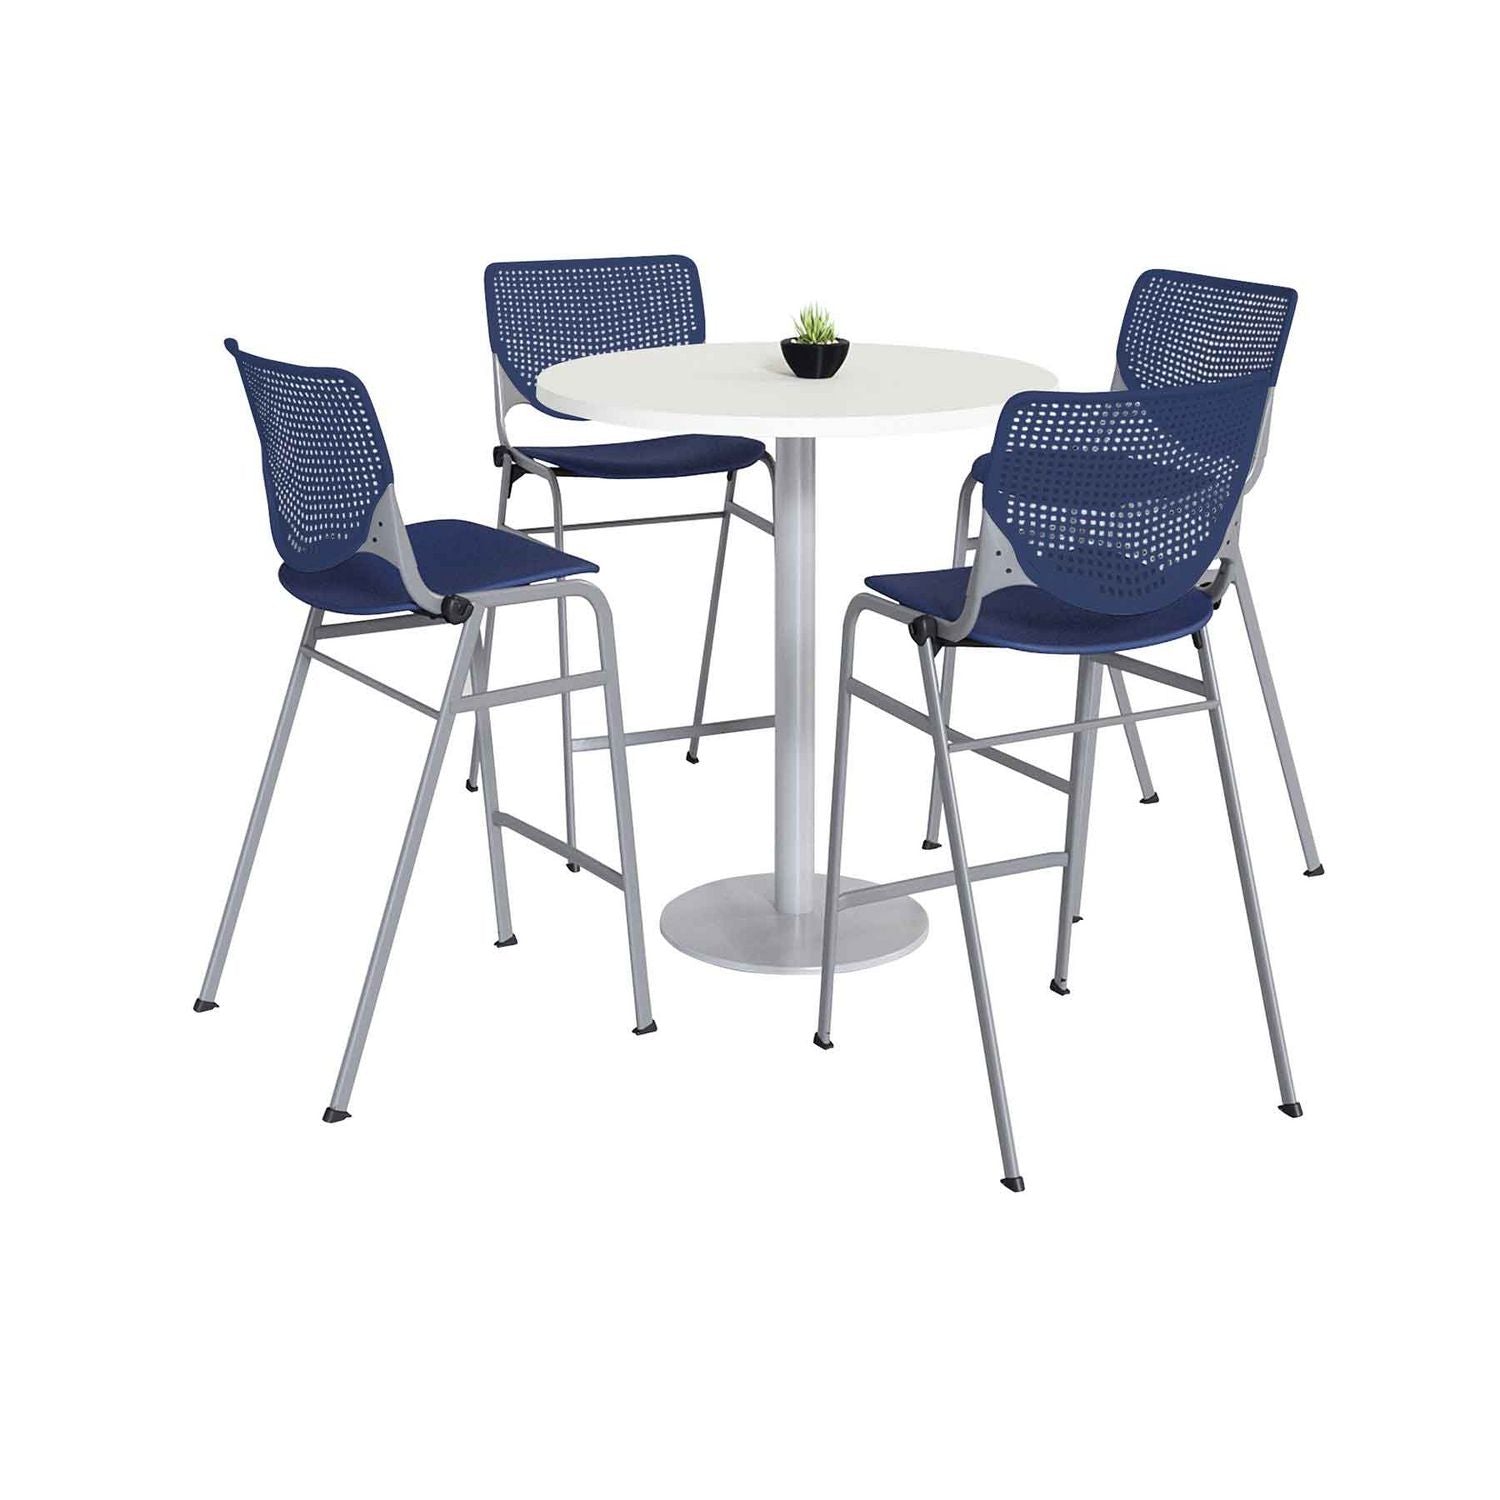 pedestal-bistro-table-with-four-navy-kool-series-barstools-round-36-dia-x-41h-designer-white-ships-in-4-6-business-days_kfi811774037051 - 1